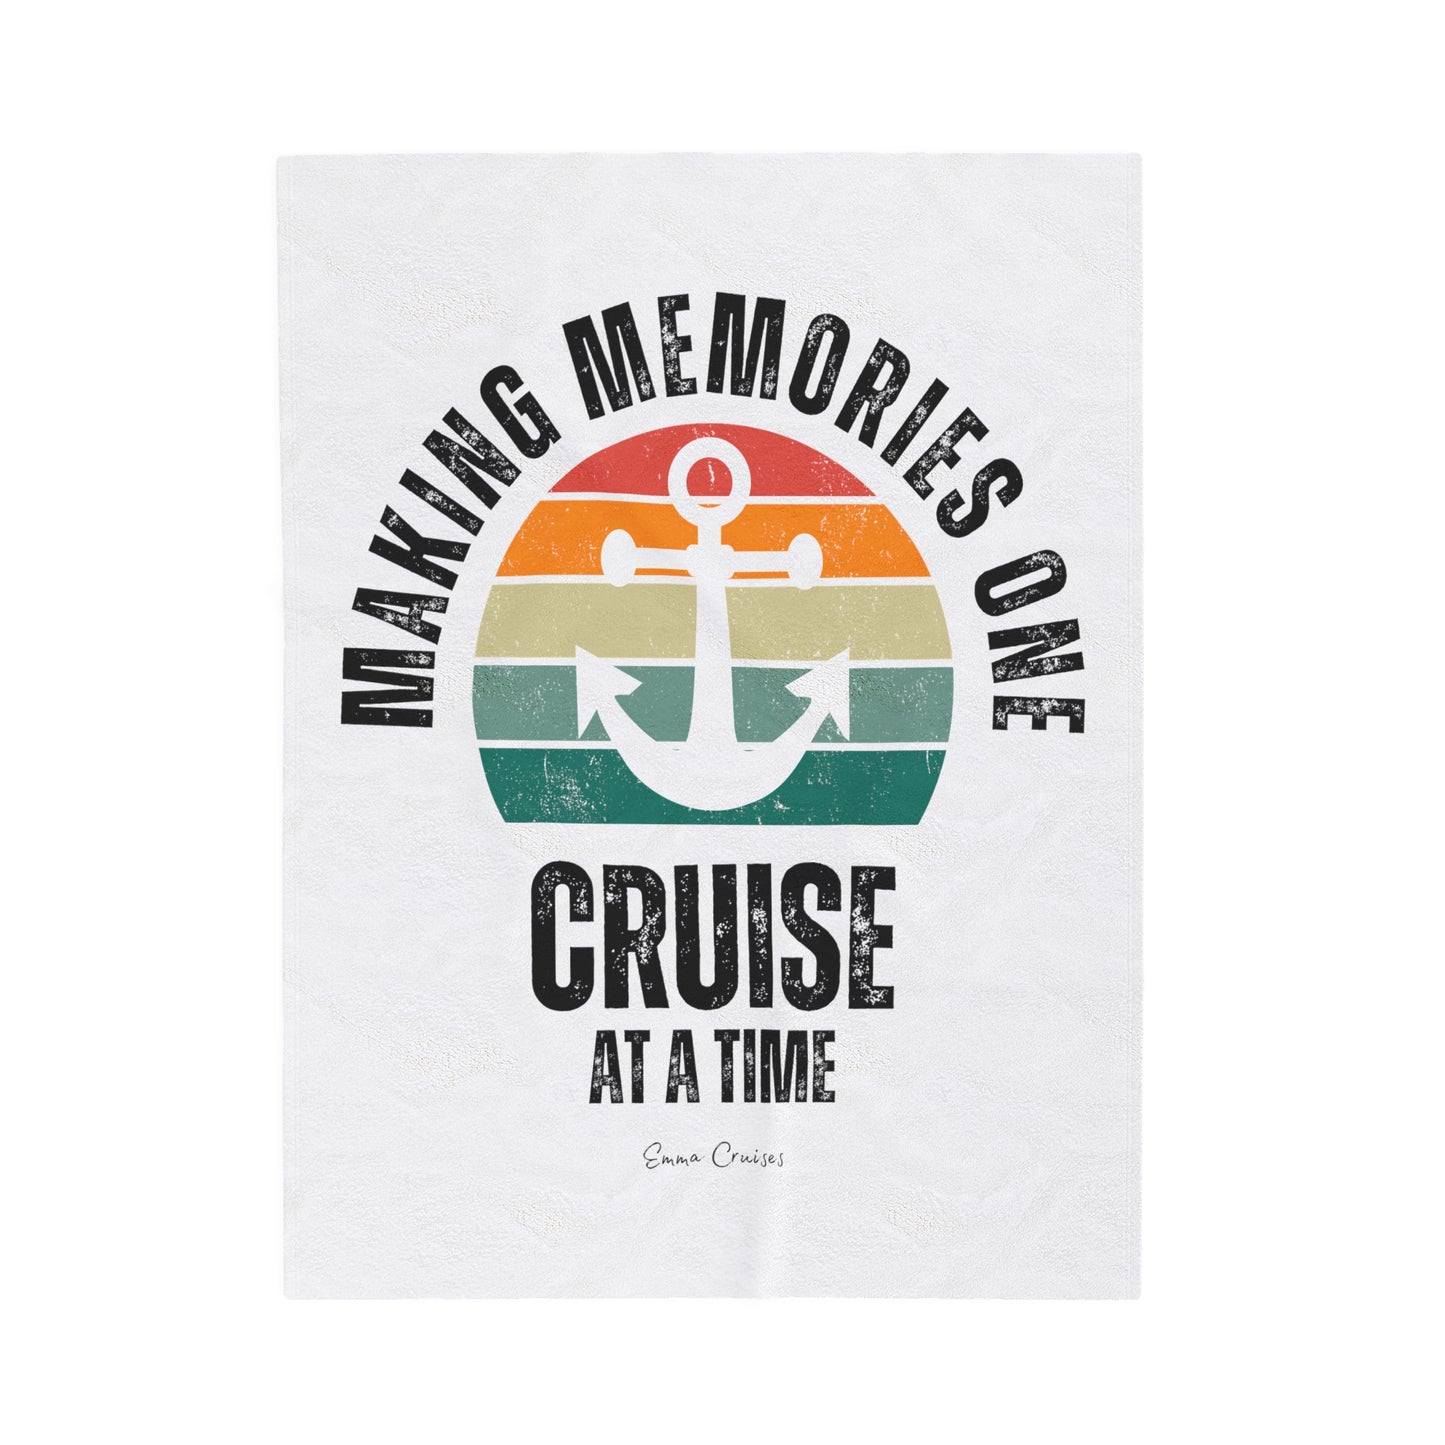 Making Memories One Cruise at a Time - Velveteen Plush Blanket